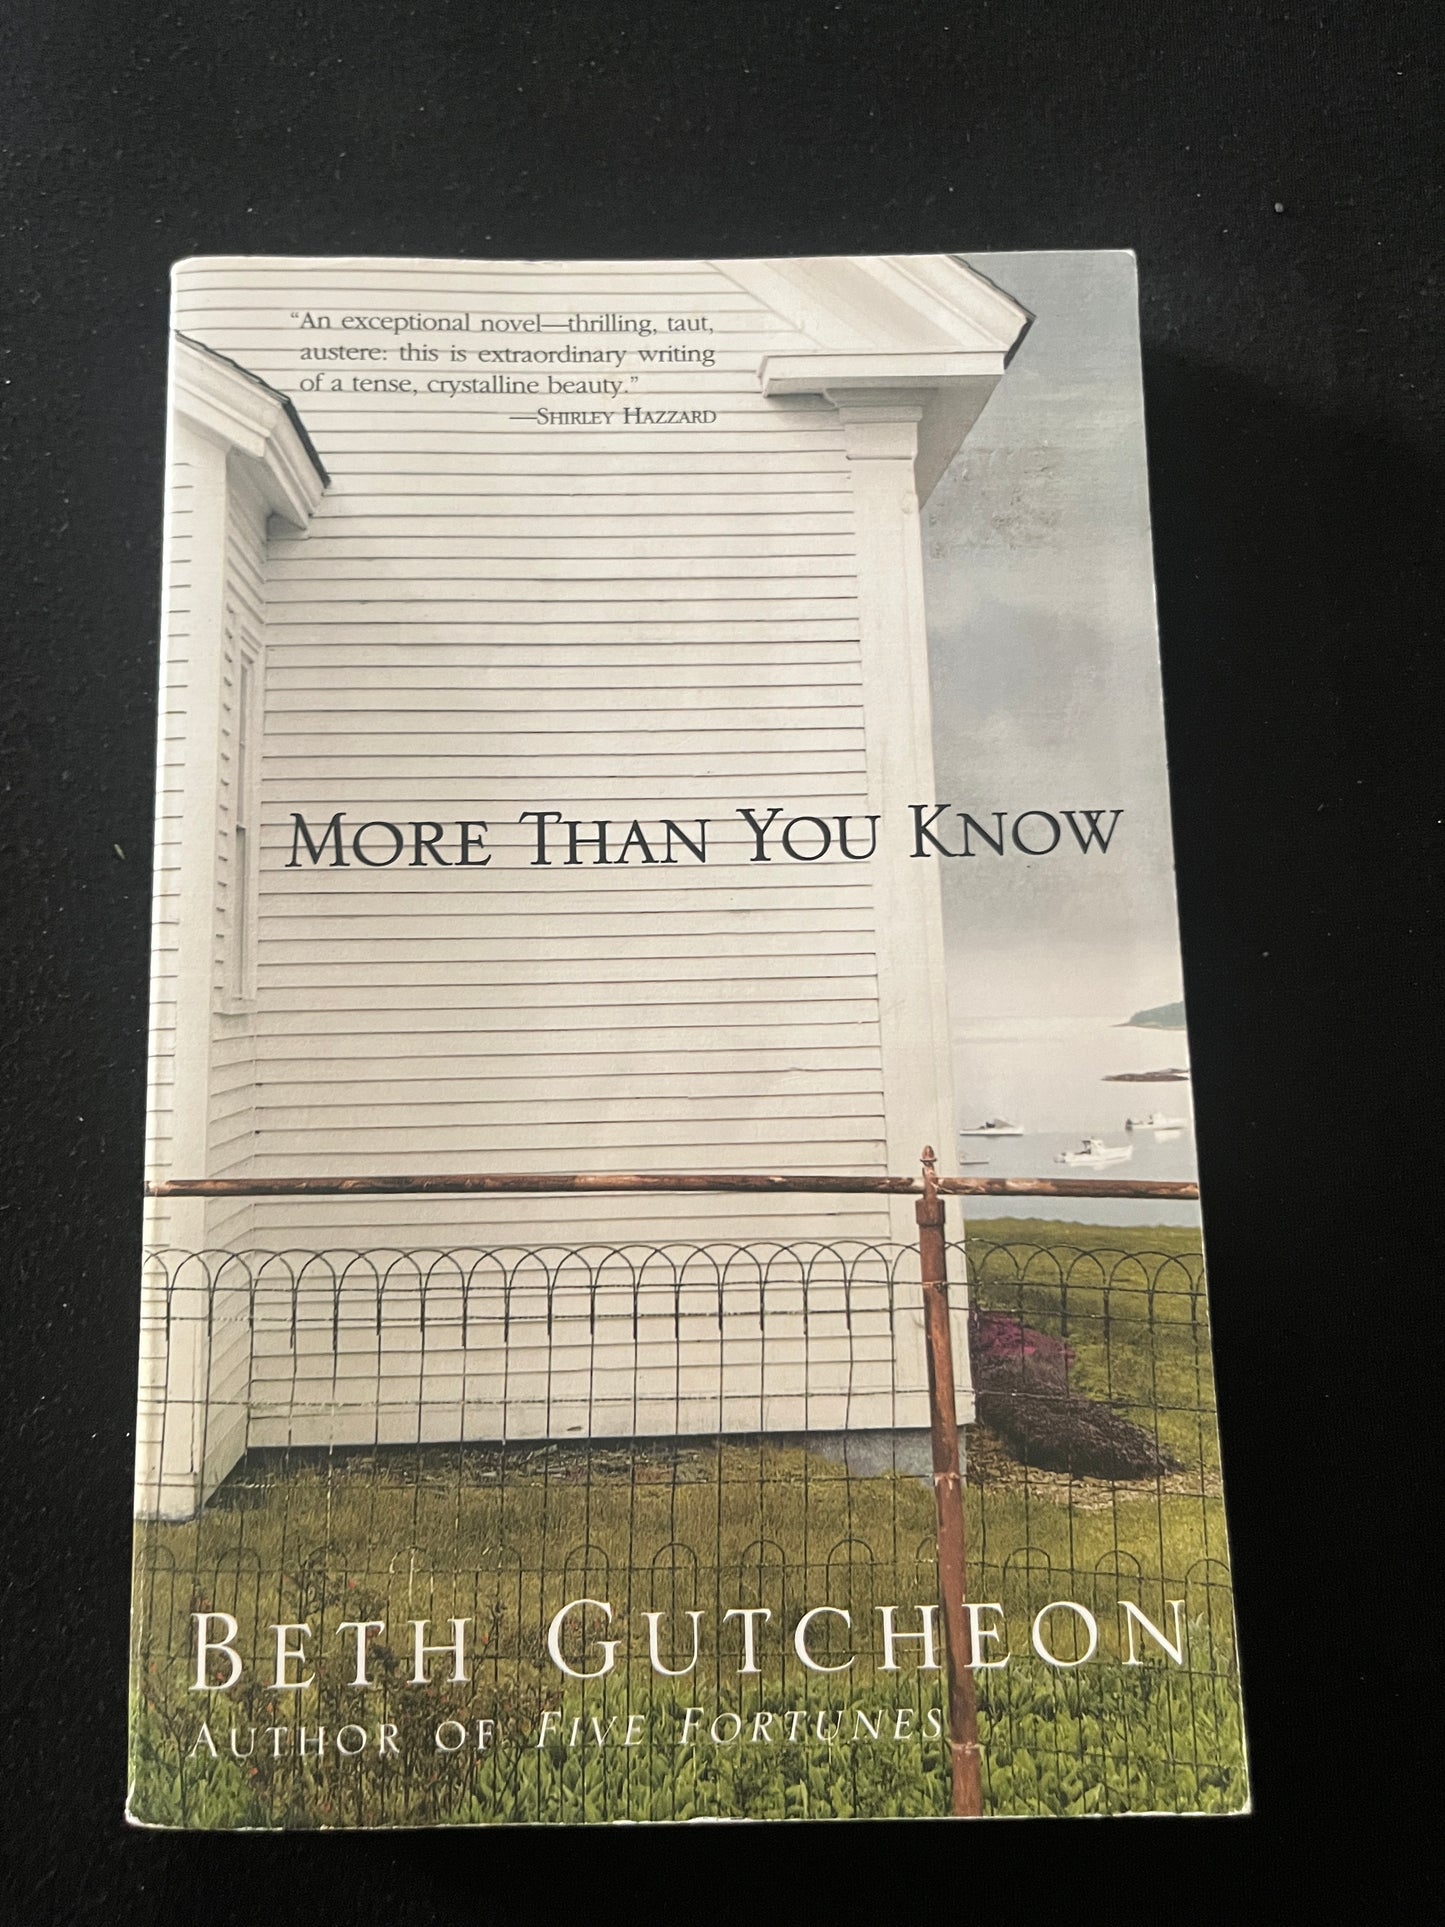 MORE THAN YOU KNOW by Beth Gutcheon